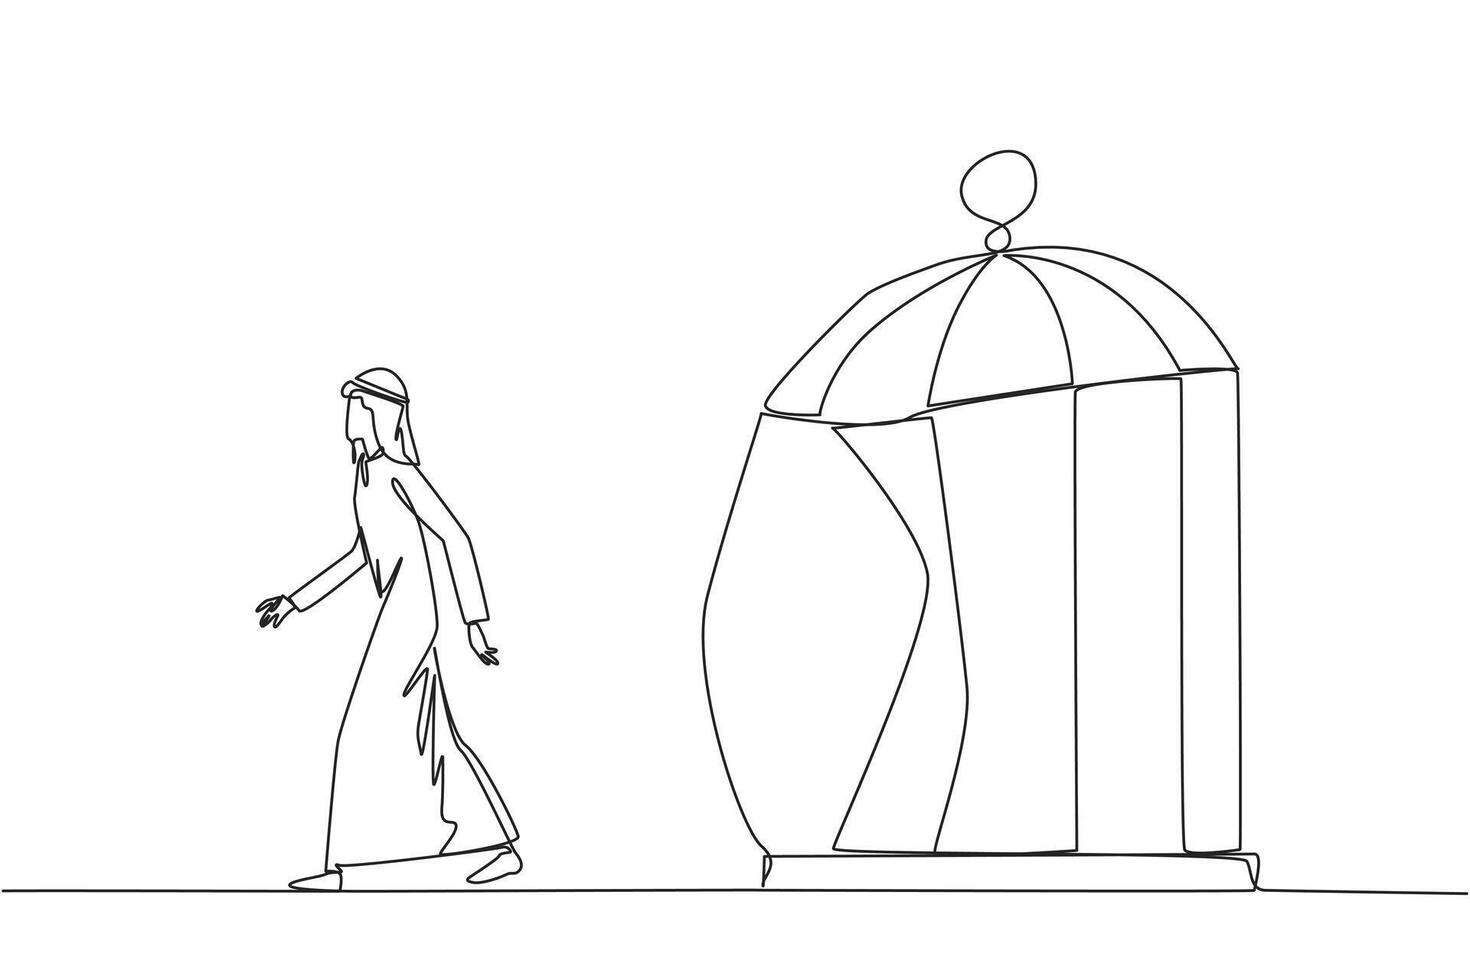 Single one line drawing Arab businessman trapped in cage and walking penetrate the cage. Metaphor seeking new challenges and experiences for better future. Continuous line design graphic illustration vector